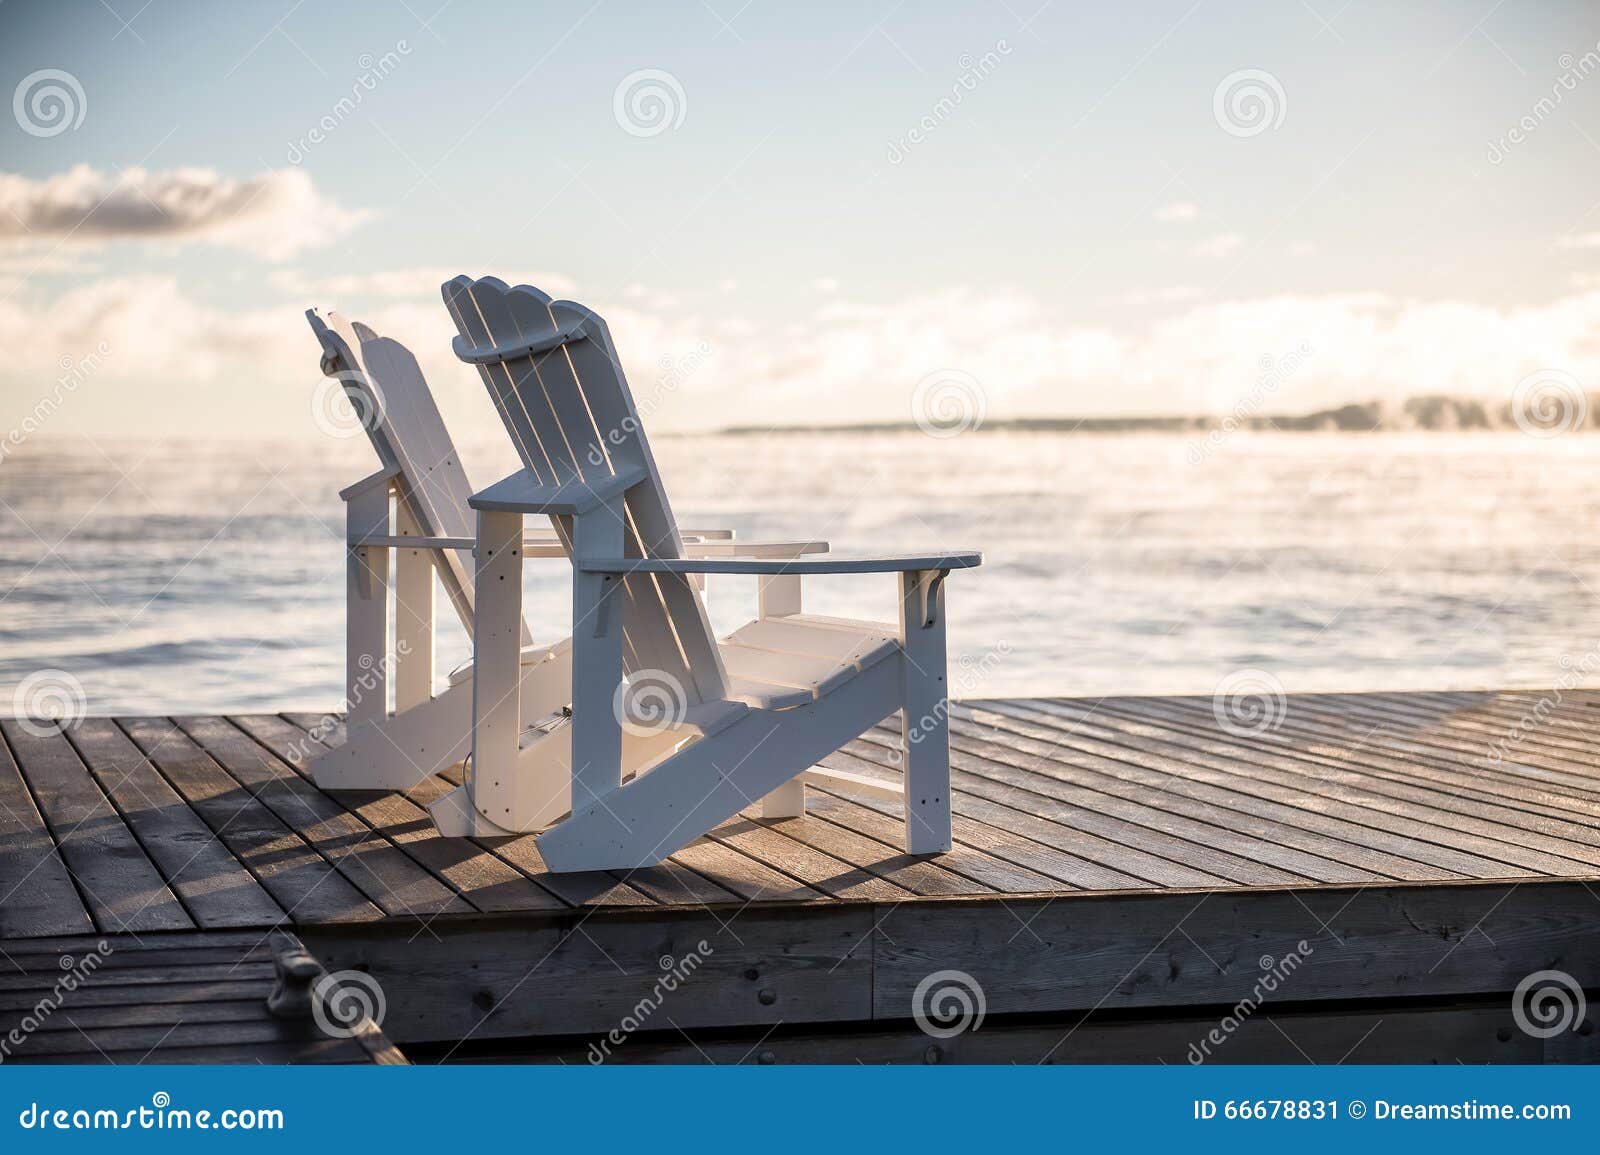 muskoka chairs on a dock with sun rising and mist